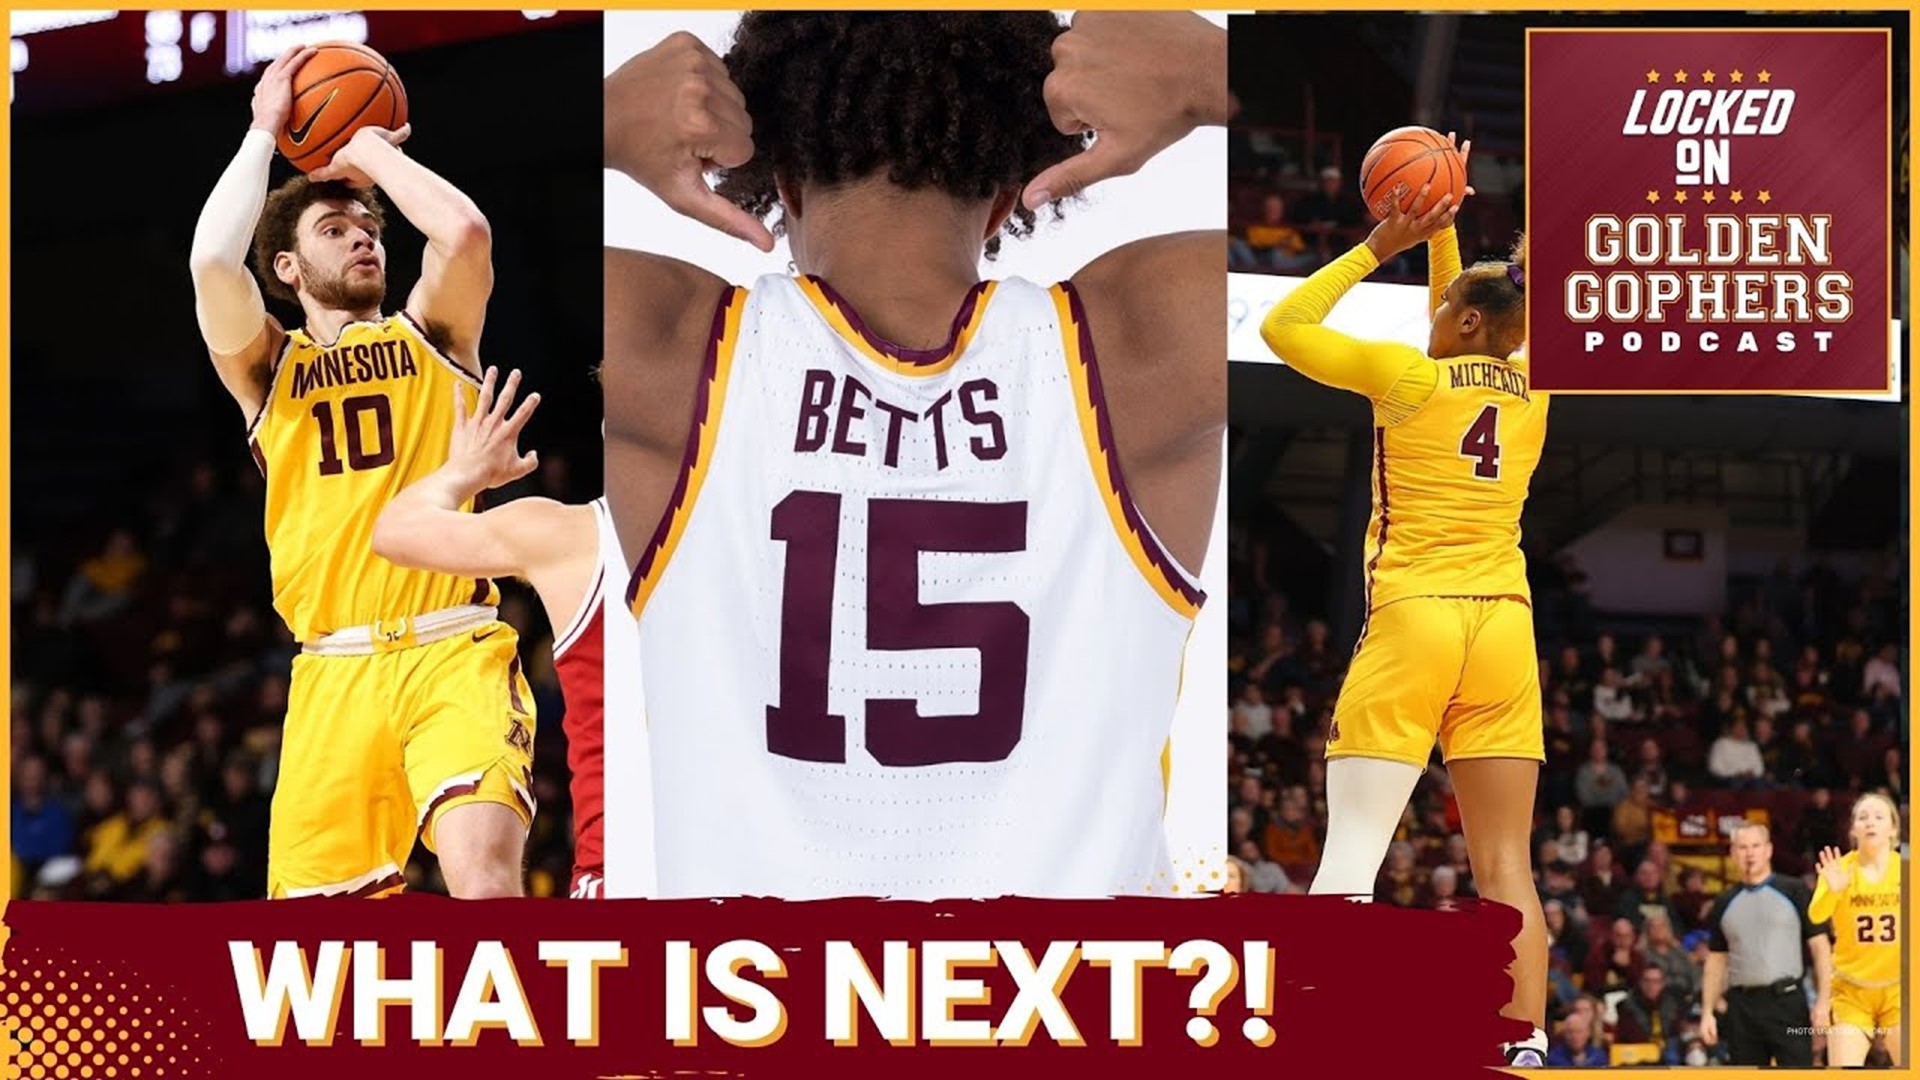 Today we discuss why should a player choose to transfer to Minnesota. We also talk about why even if the departures were expected, how they are leaving still hurts